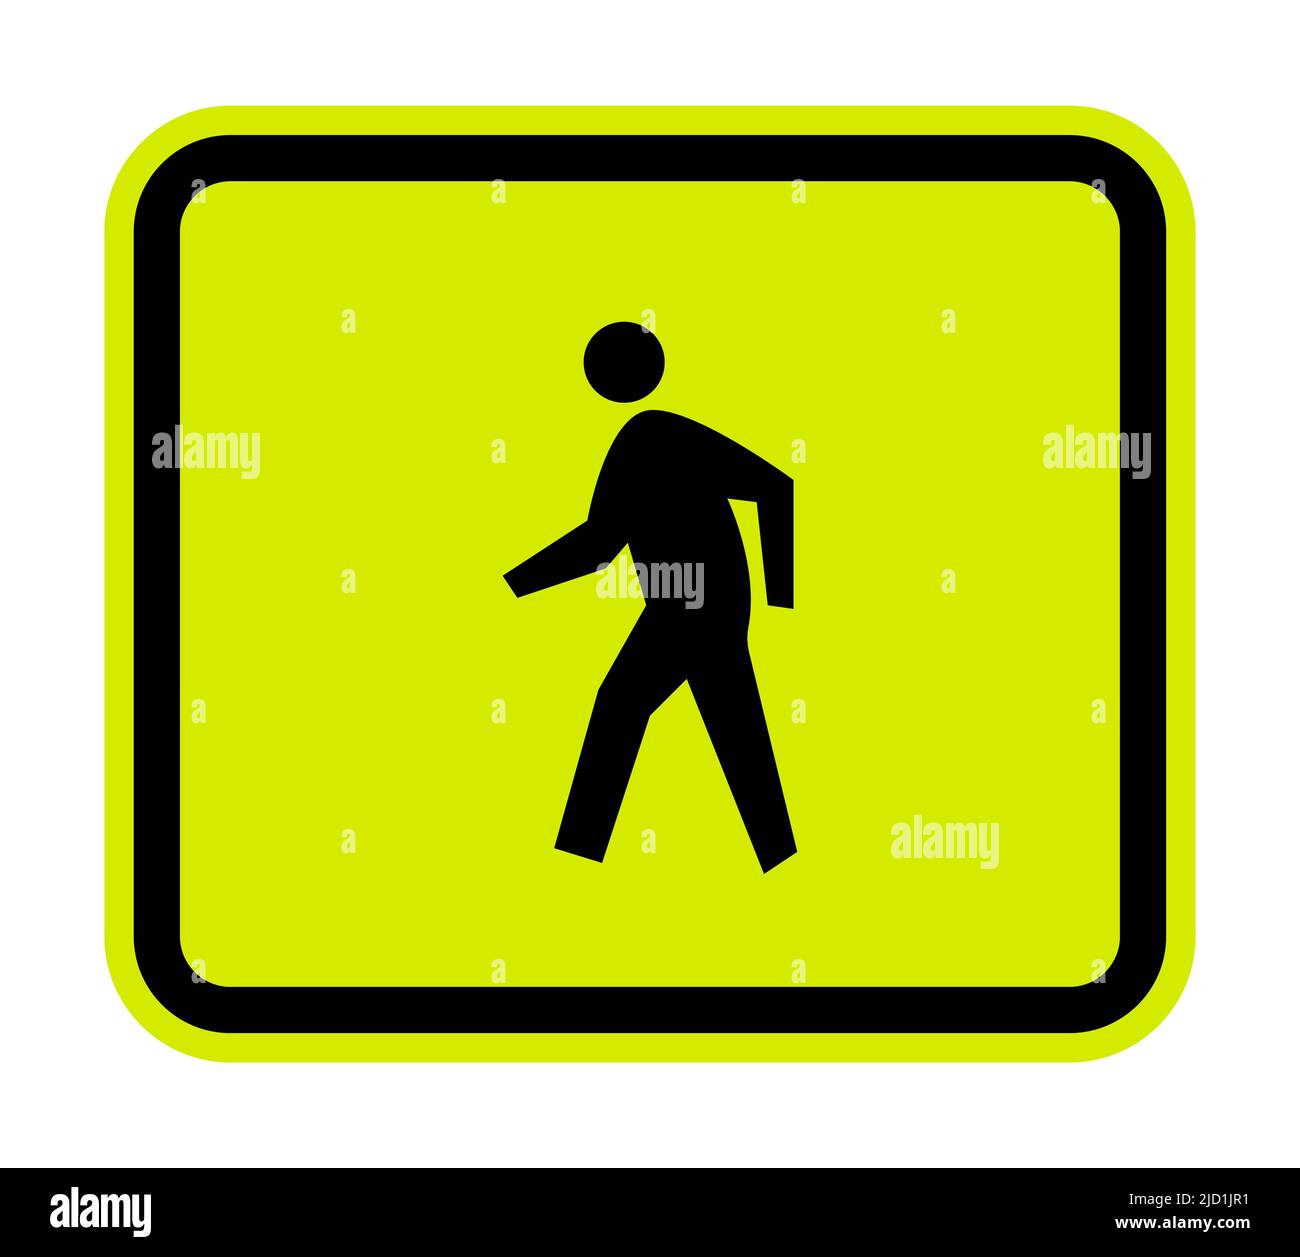 Pedestrian Crossing Symbol Sign Isolate on White Background,Vector Illustration Stock Vector